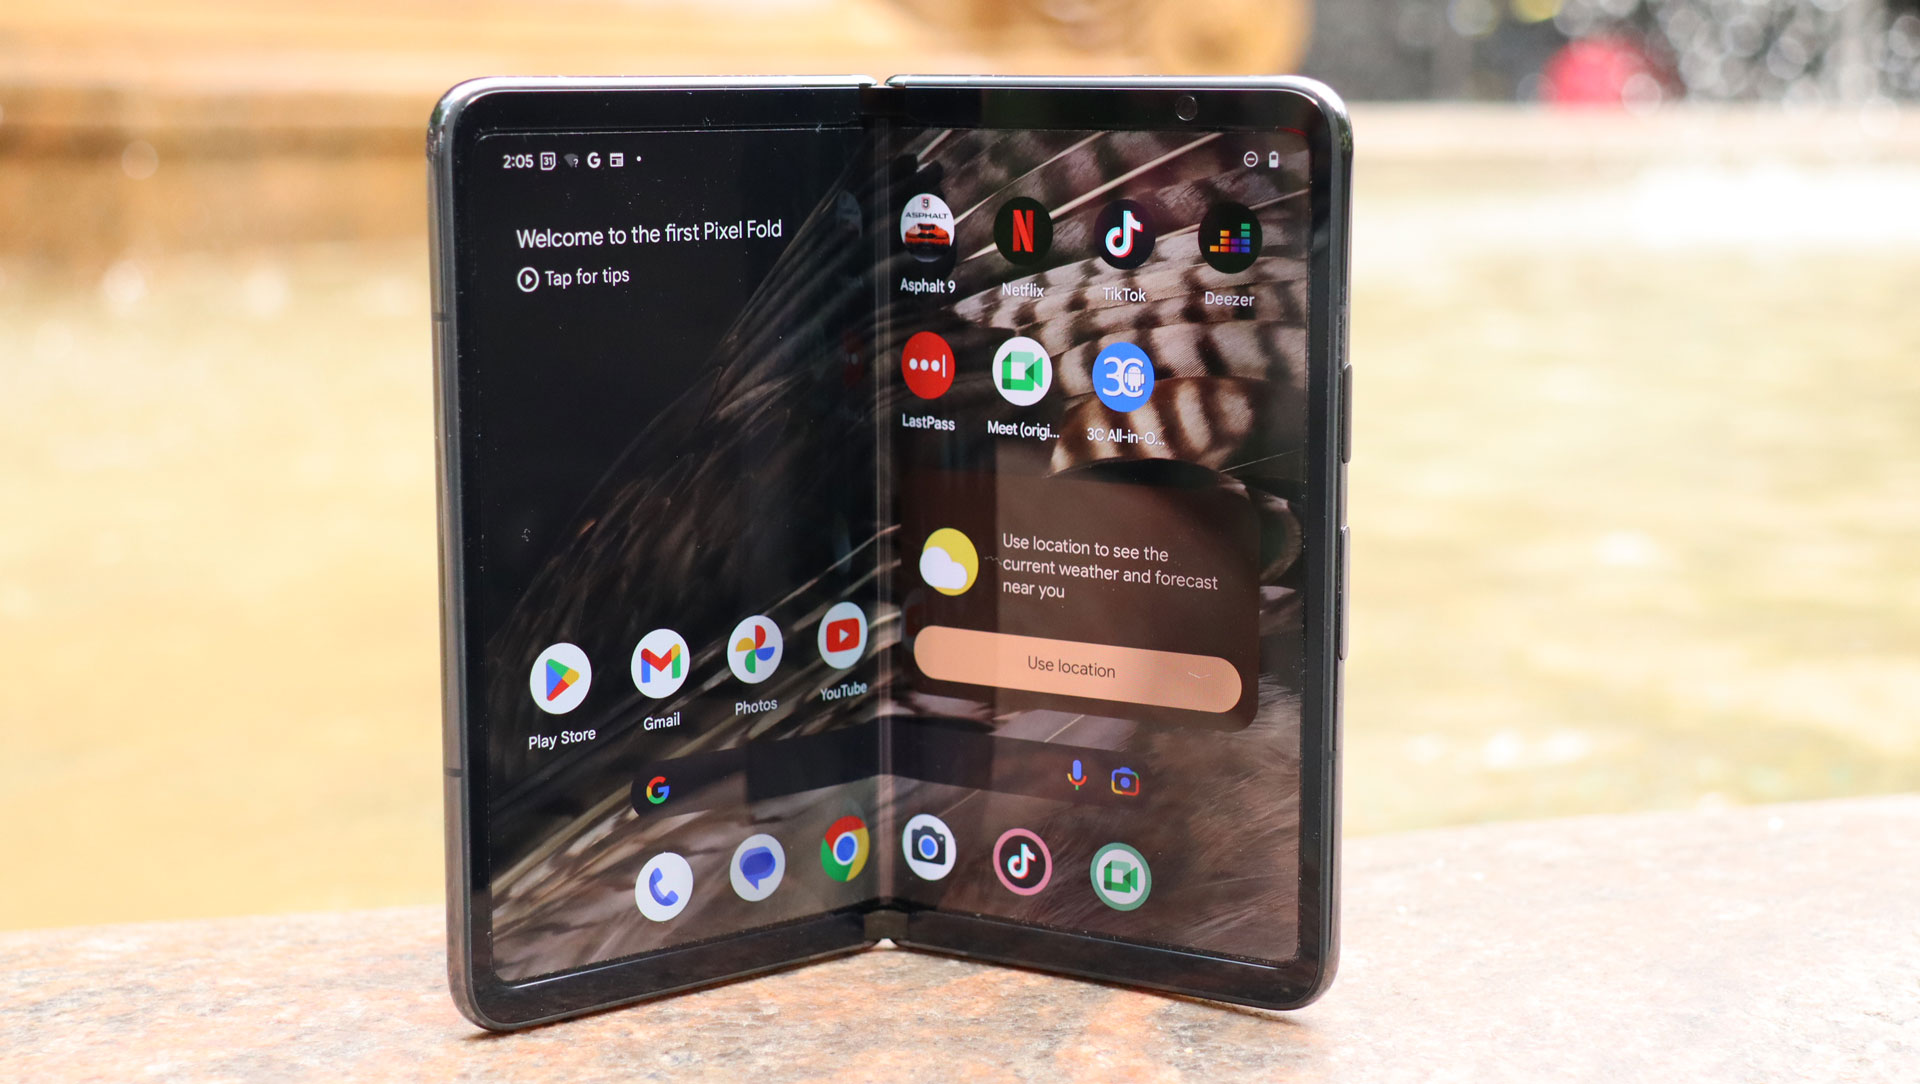 Features and Benefits of the Google Pixel Fold – Is it Worth the Price?